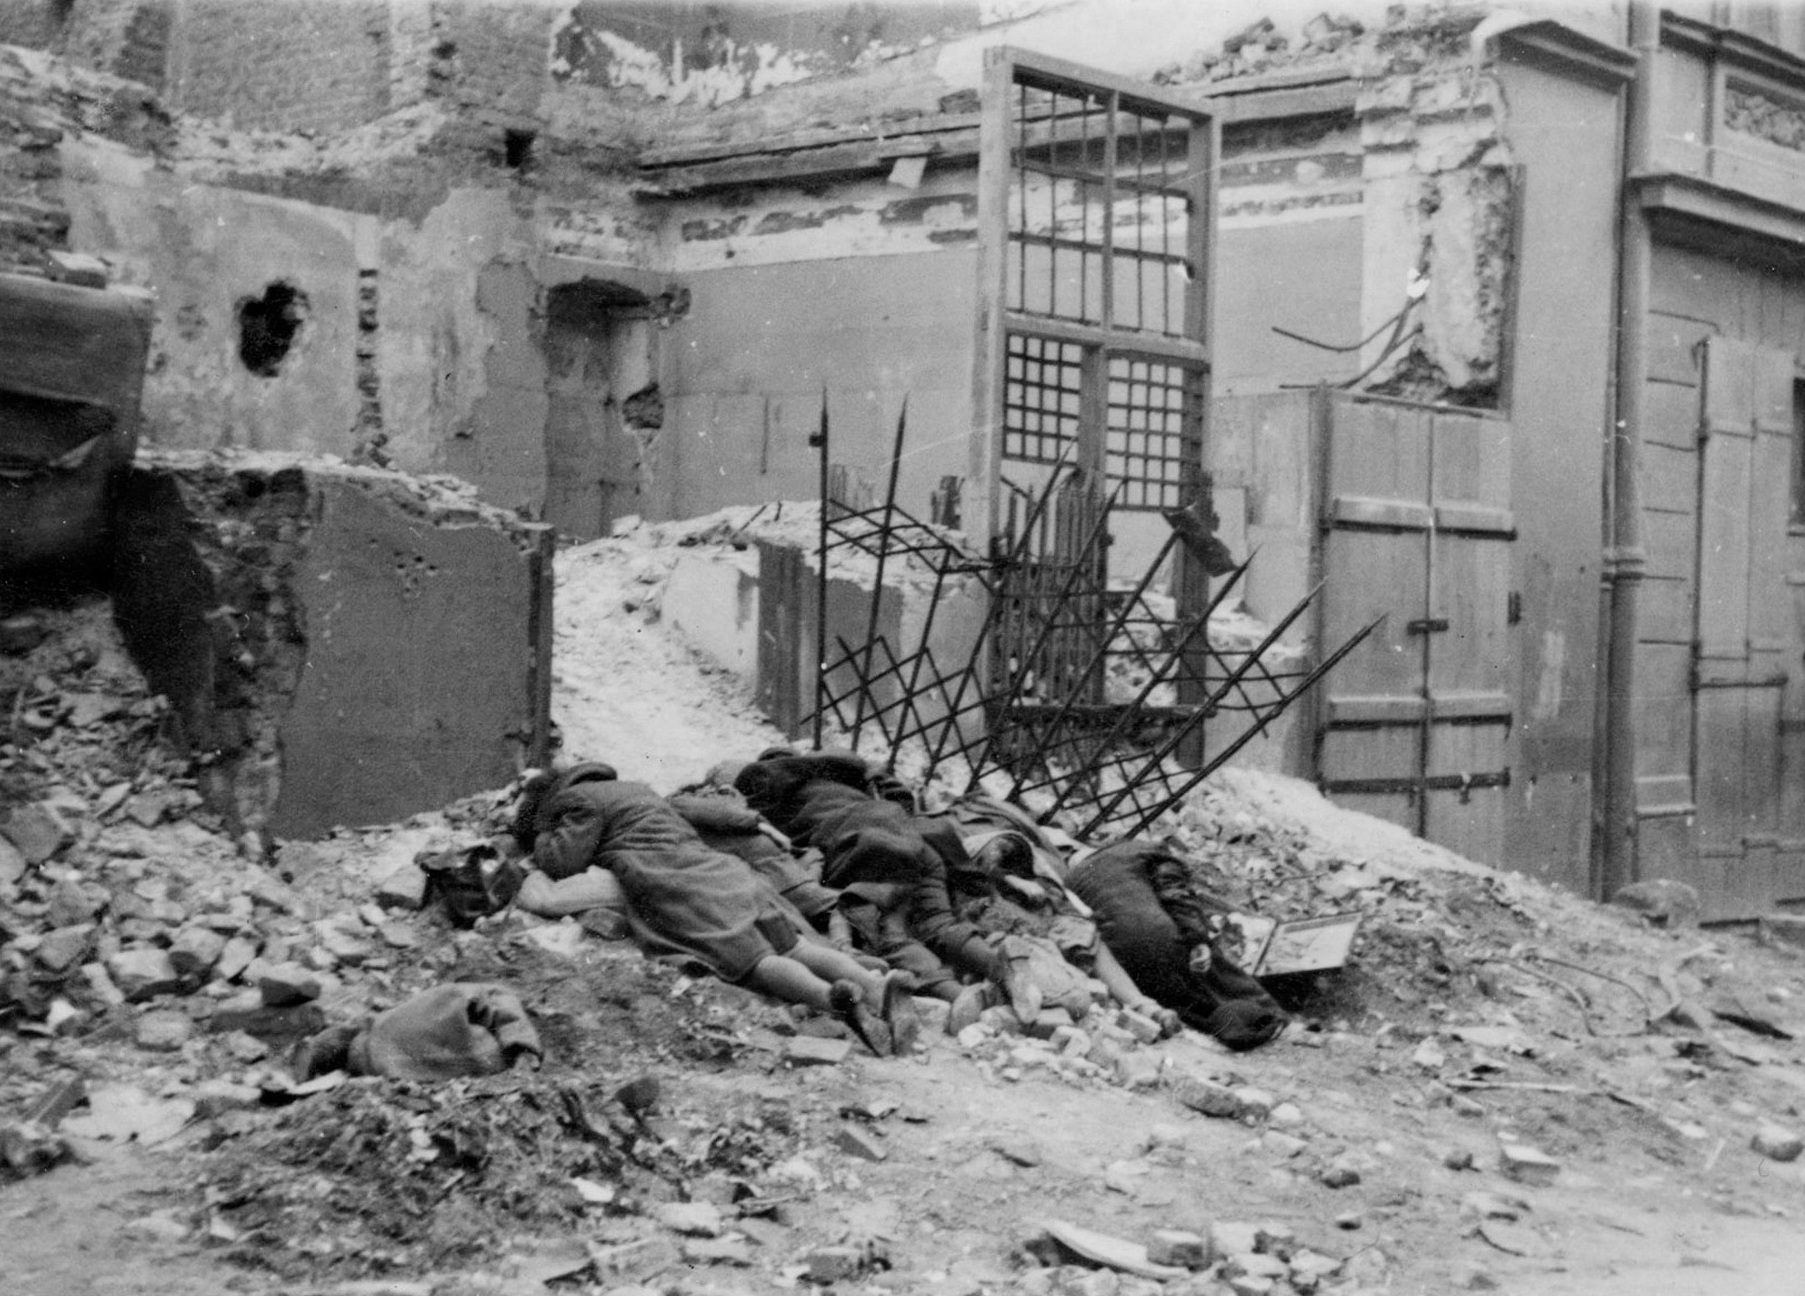 Executed Jews in the Warsaw Ghetto, Poland, Apr-May 1943